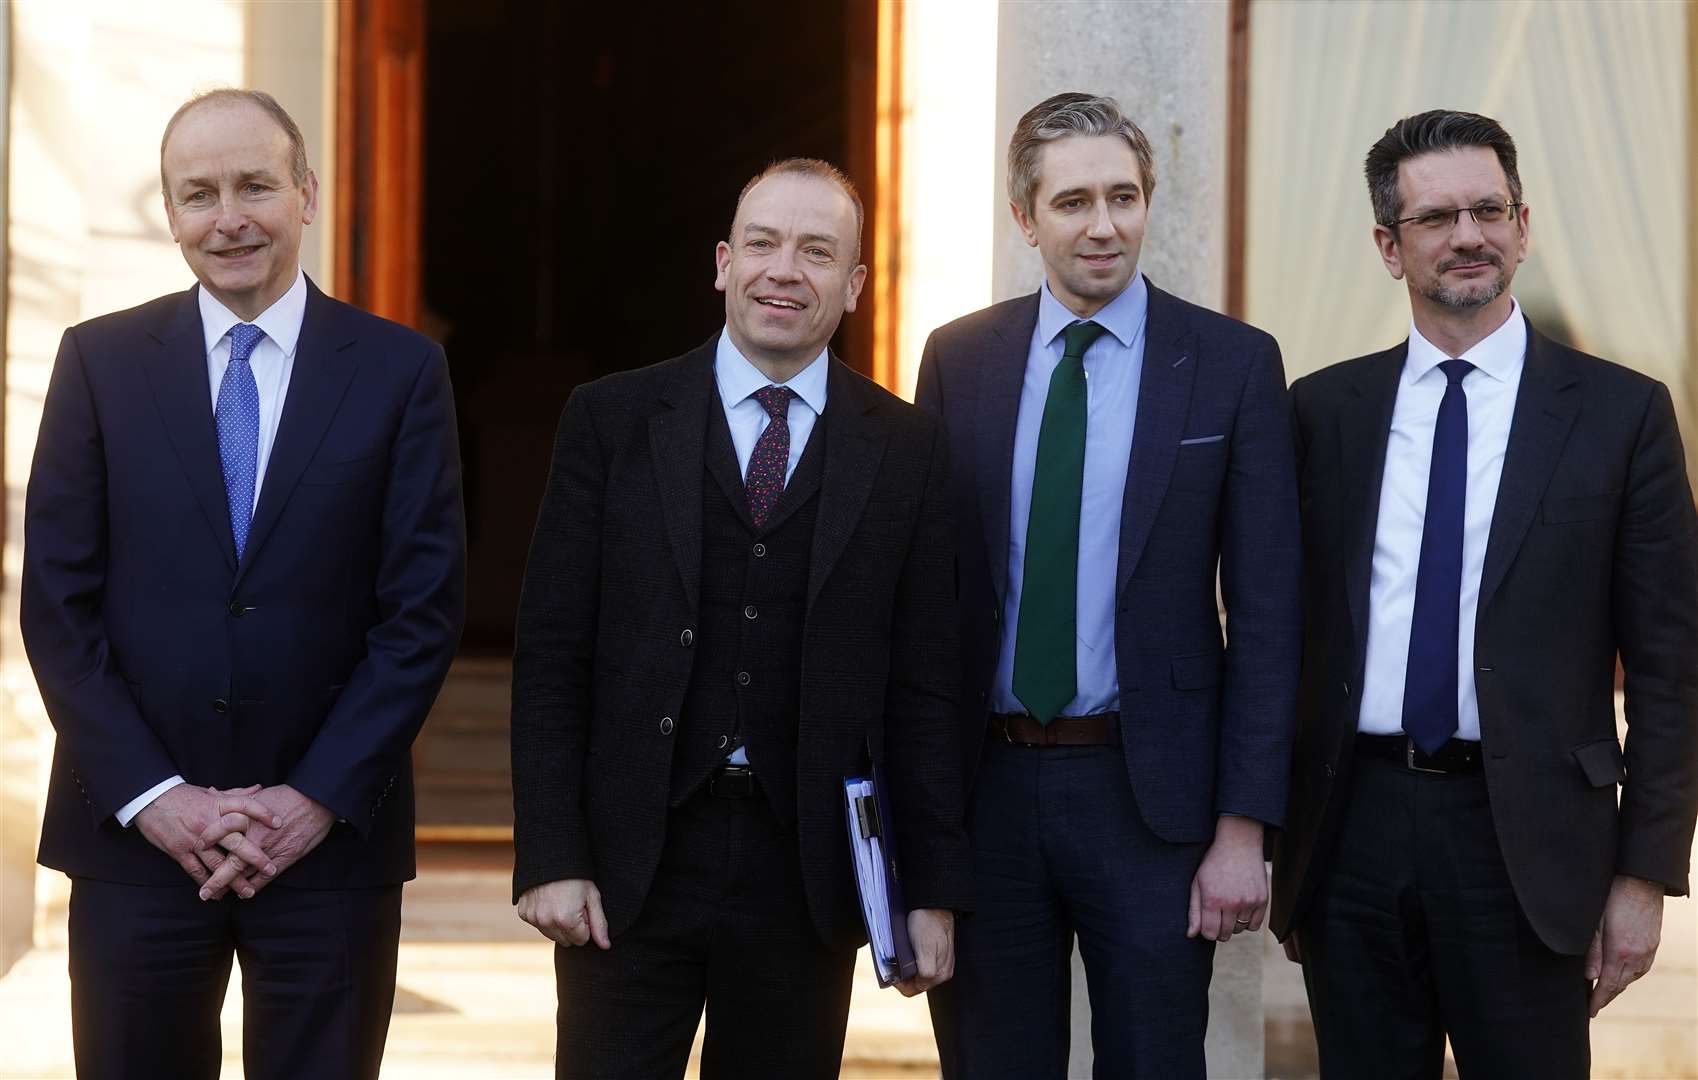 Mr Heaton-Harris (second left) and Mr Baker (right) with Tanaiste Micheal Martin (left) Ireland Minister for Justice Simon Harris at the British Irish Intergovernmental Conference (Brian Lawless/PA)